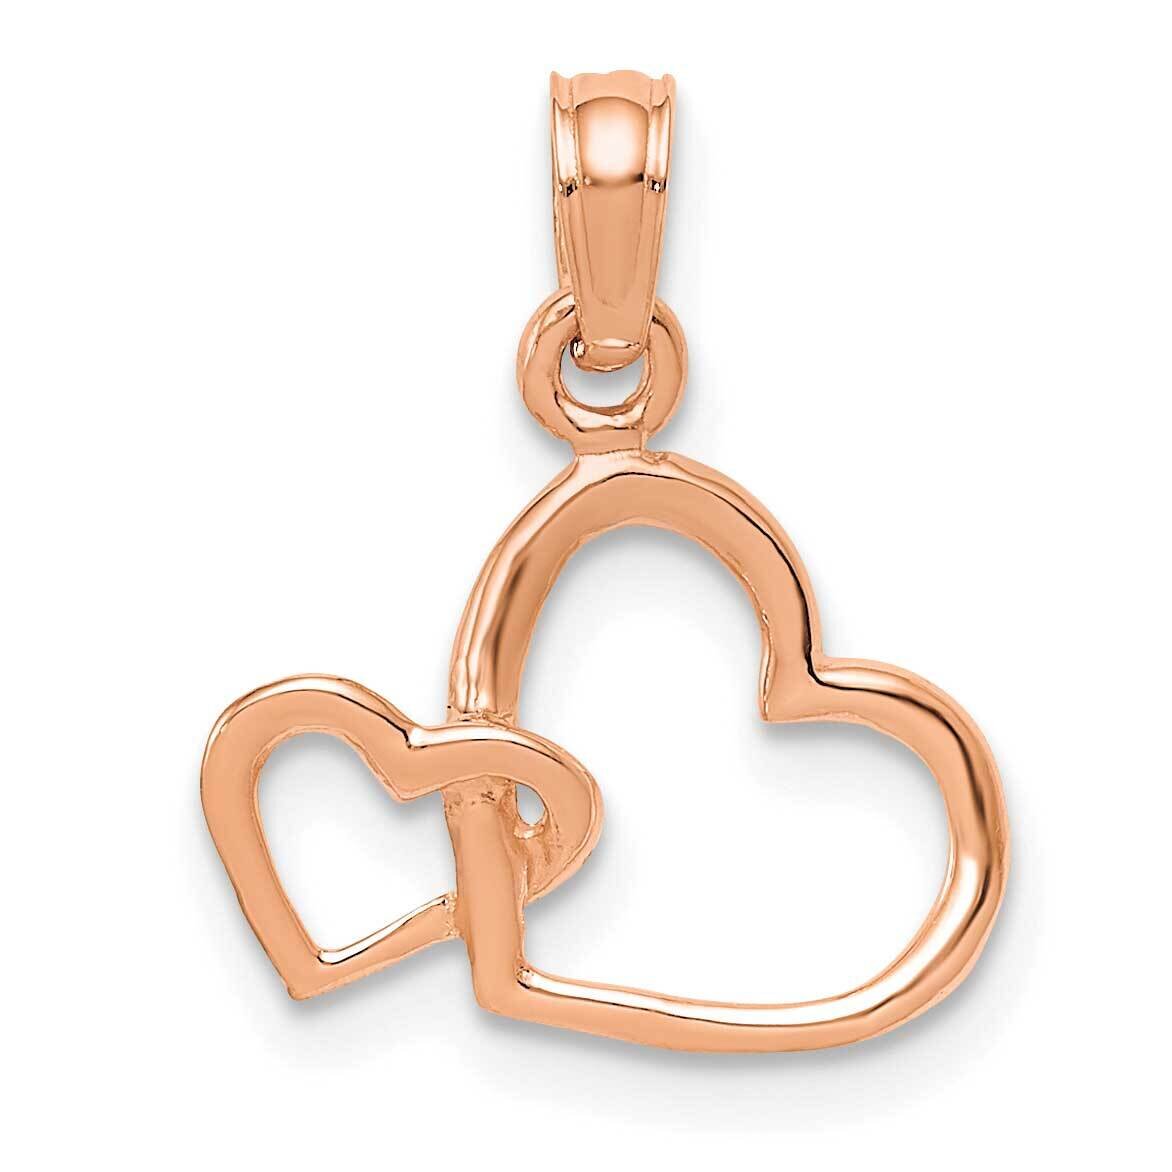 Intertwined Double Heart Pendant 14k Rose Gold Polished M2128R